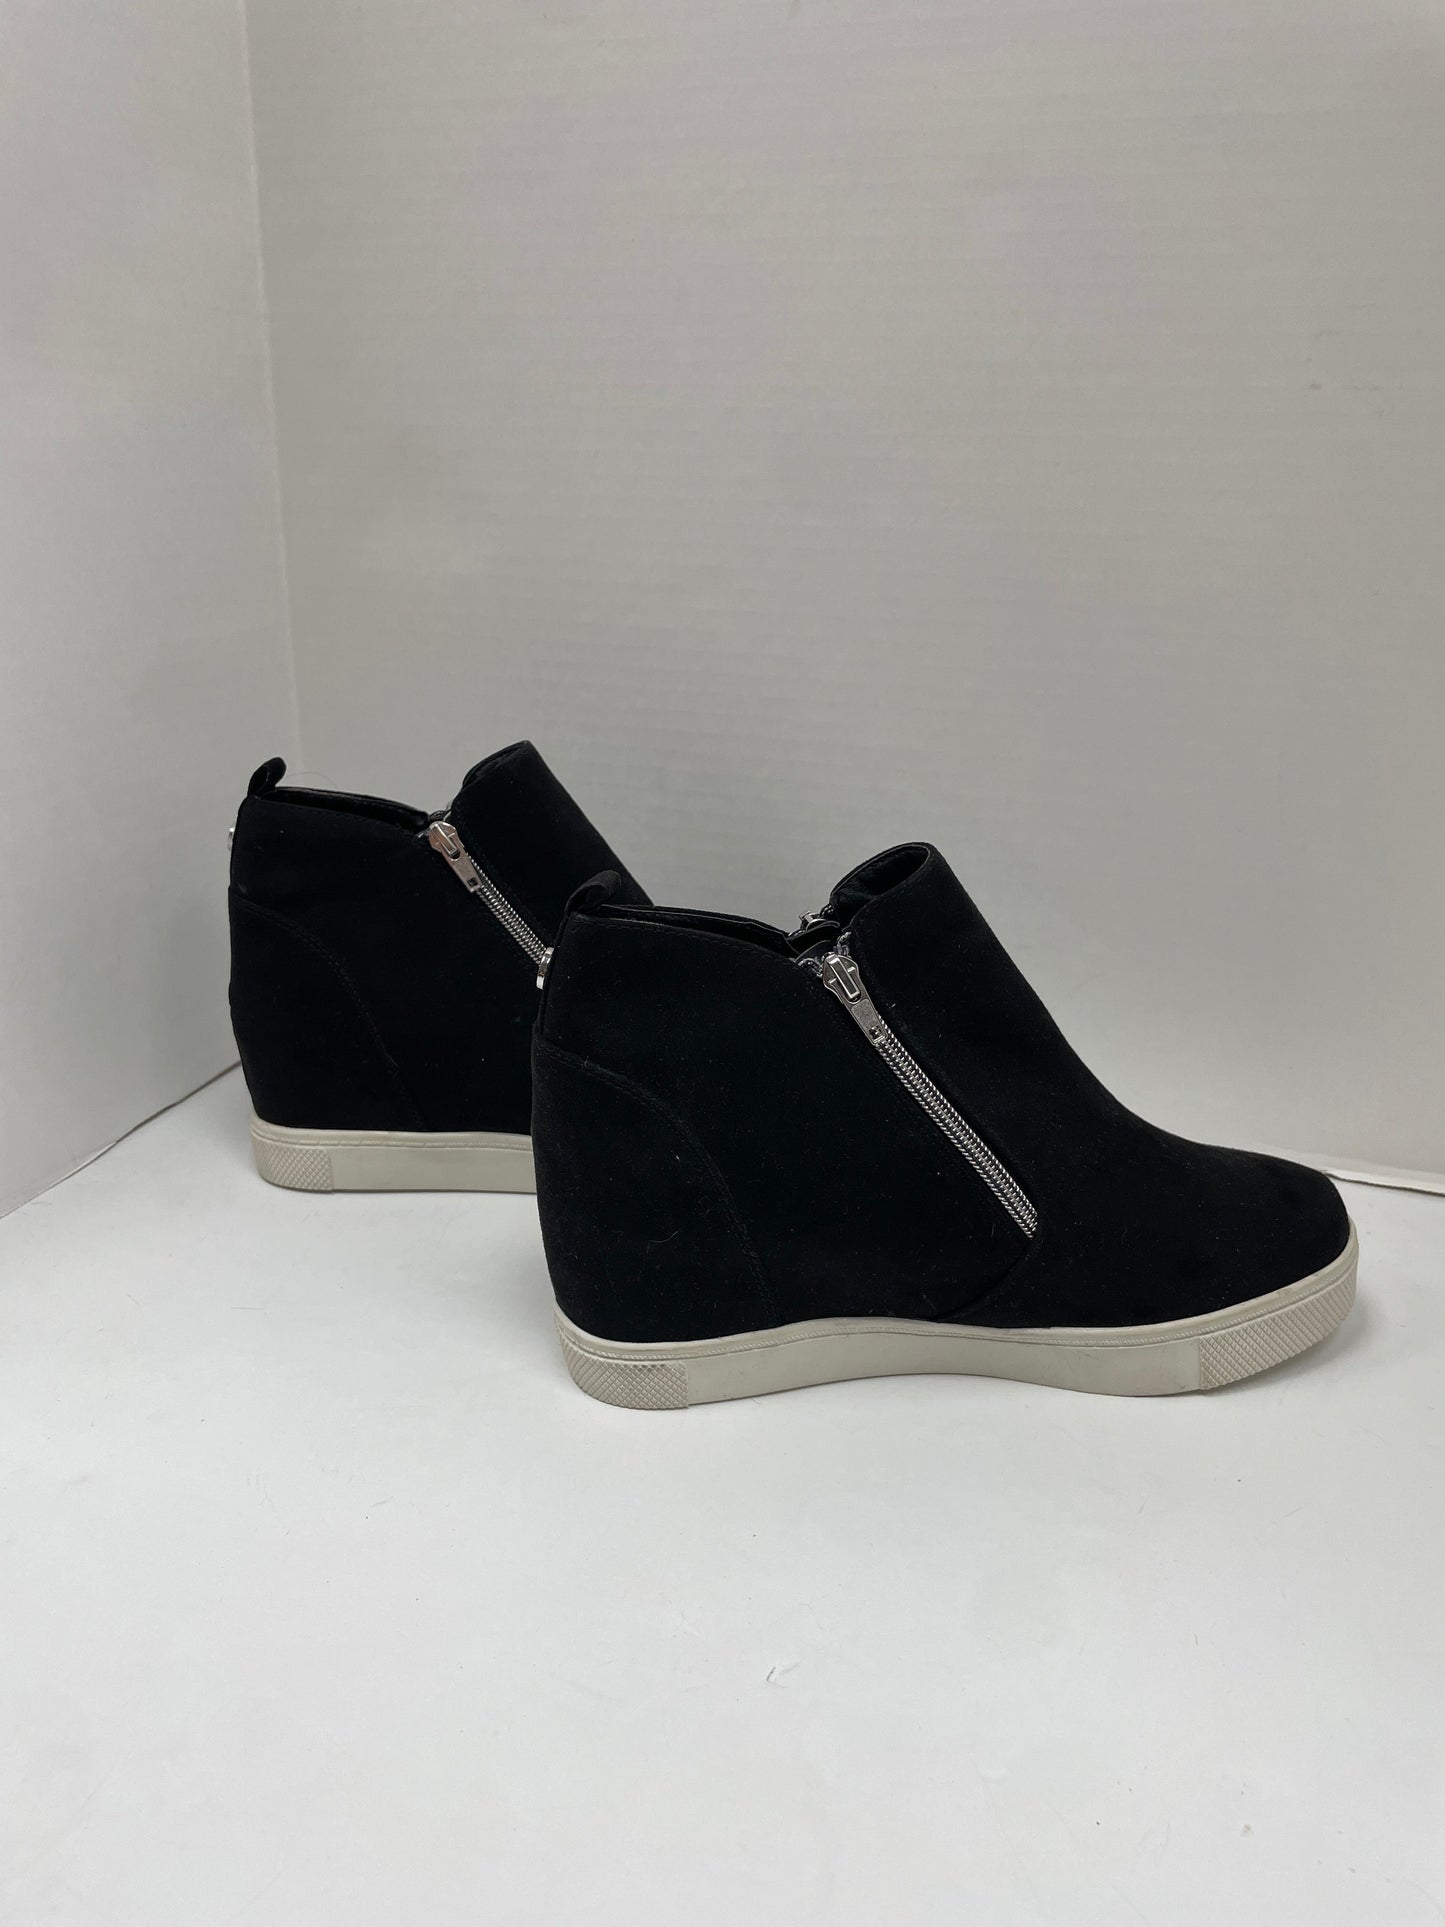 Shoes Sneakers By Steve Madden  Size: 6